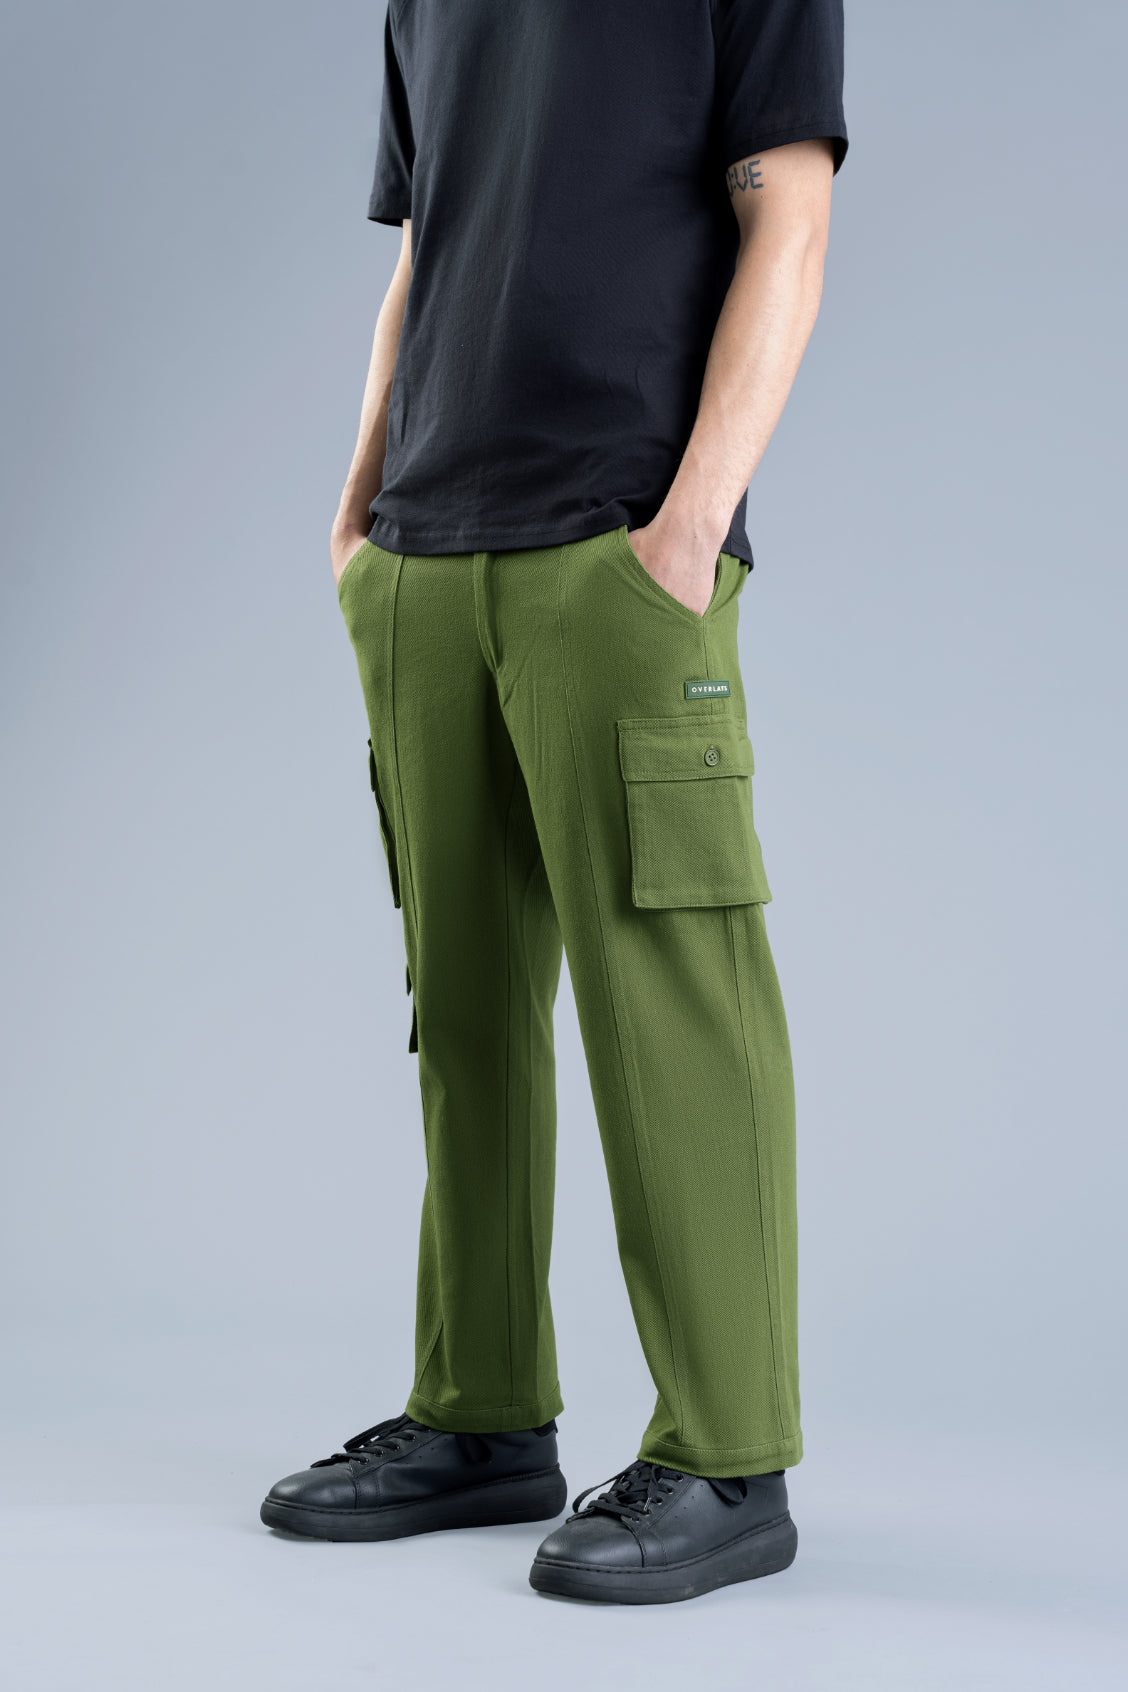 Olive green pant/trouser outfits (formal) men | Olive green pants, Trouser  outfits, Green pants